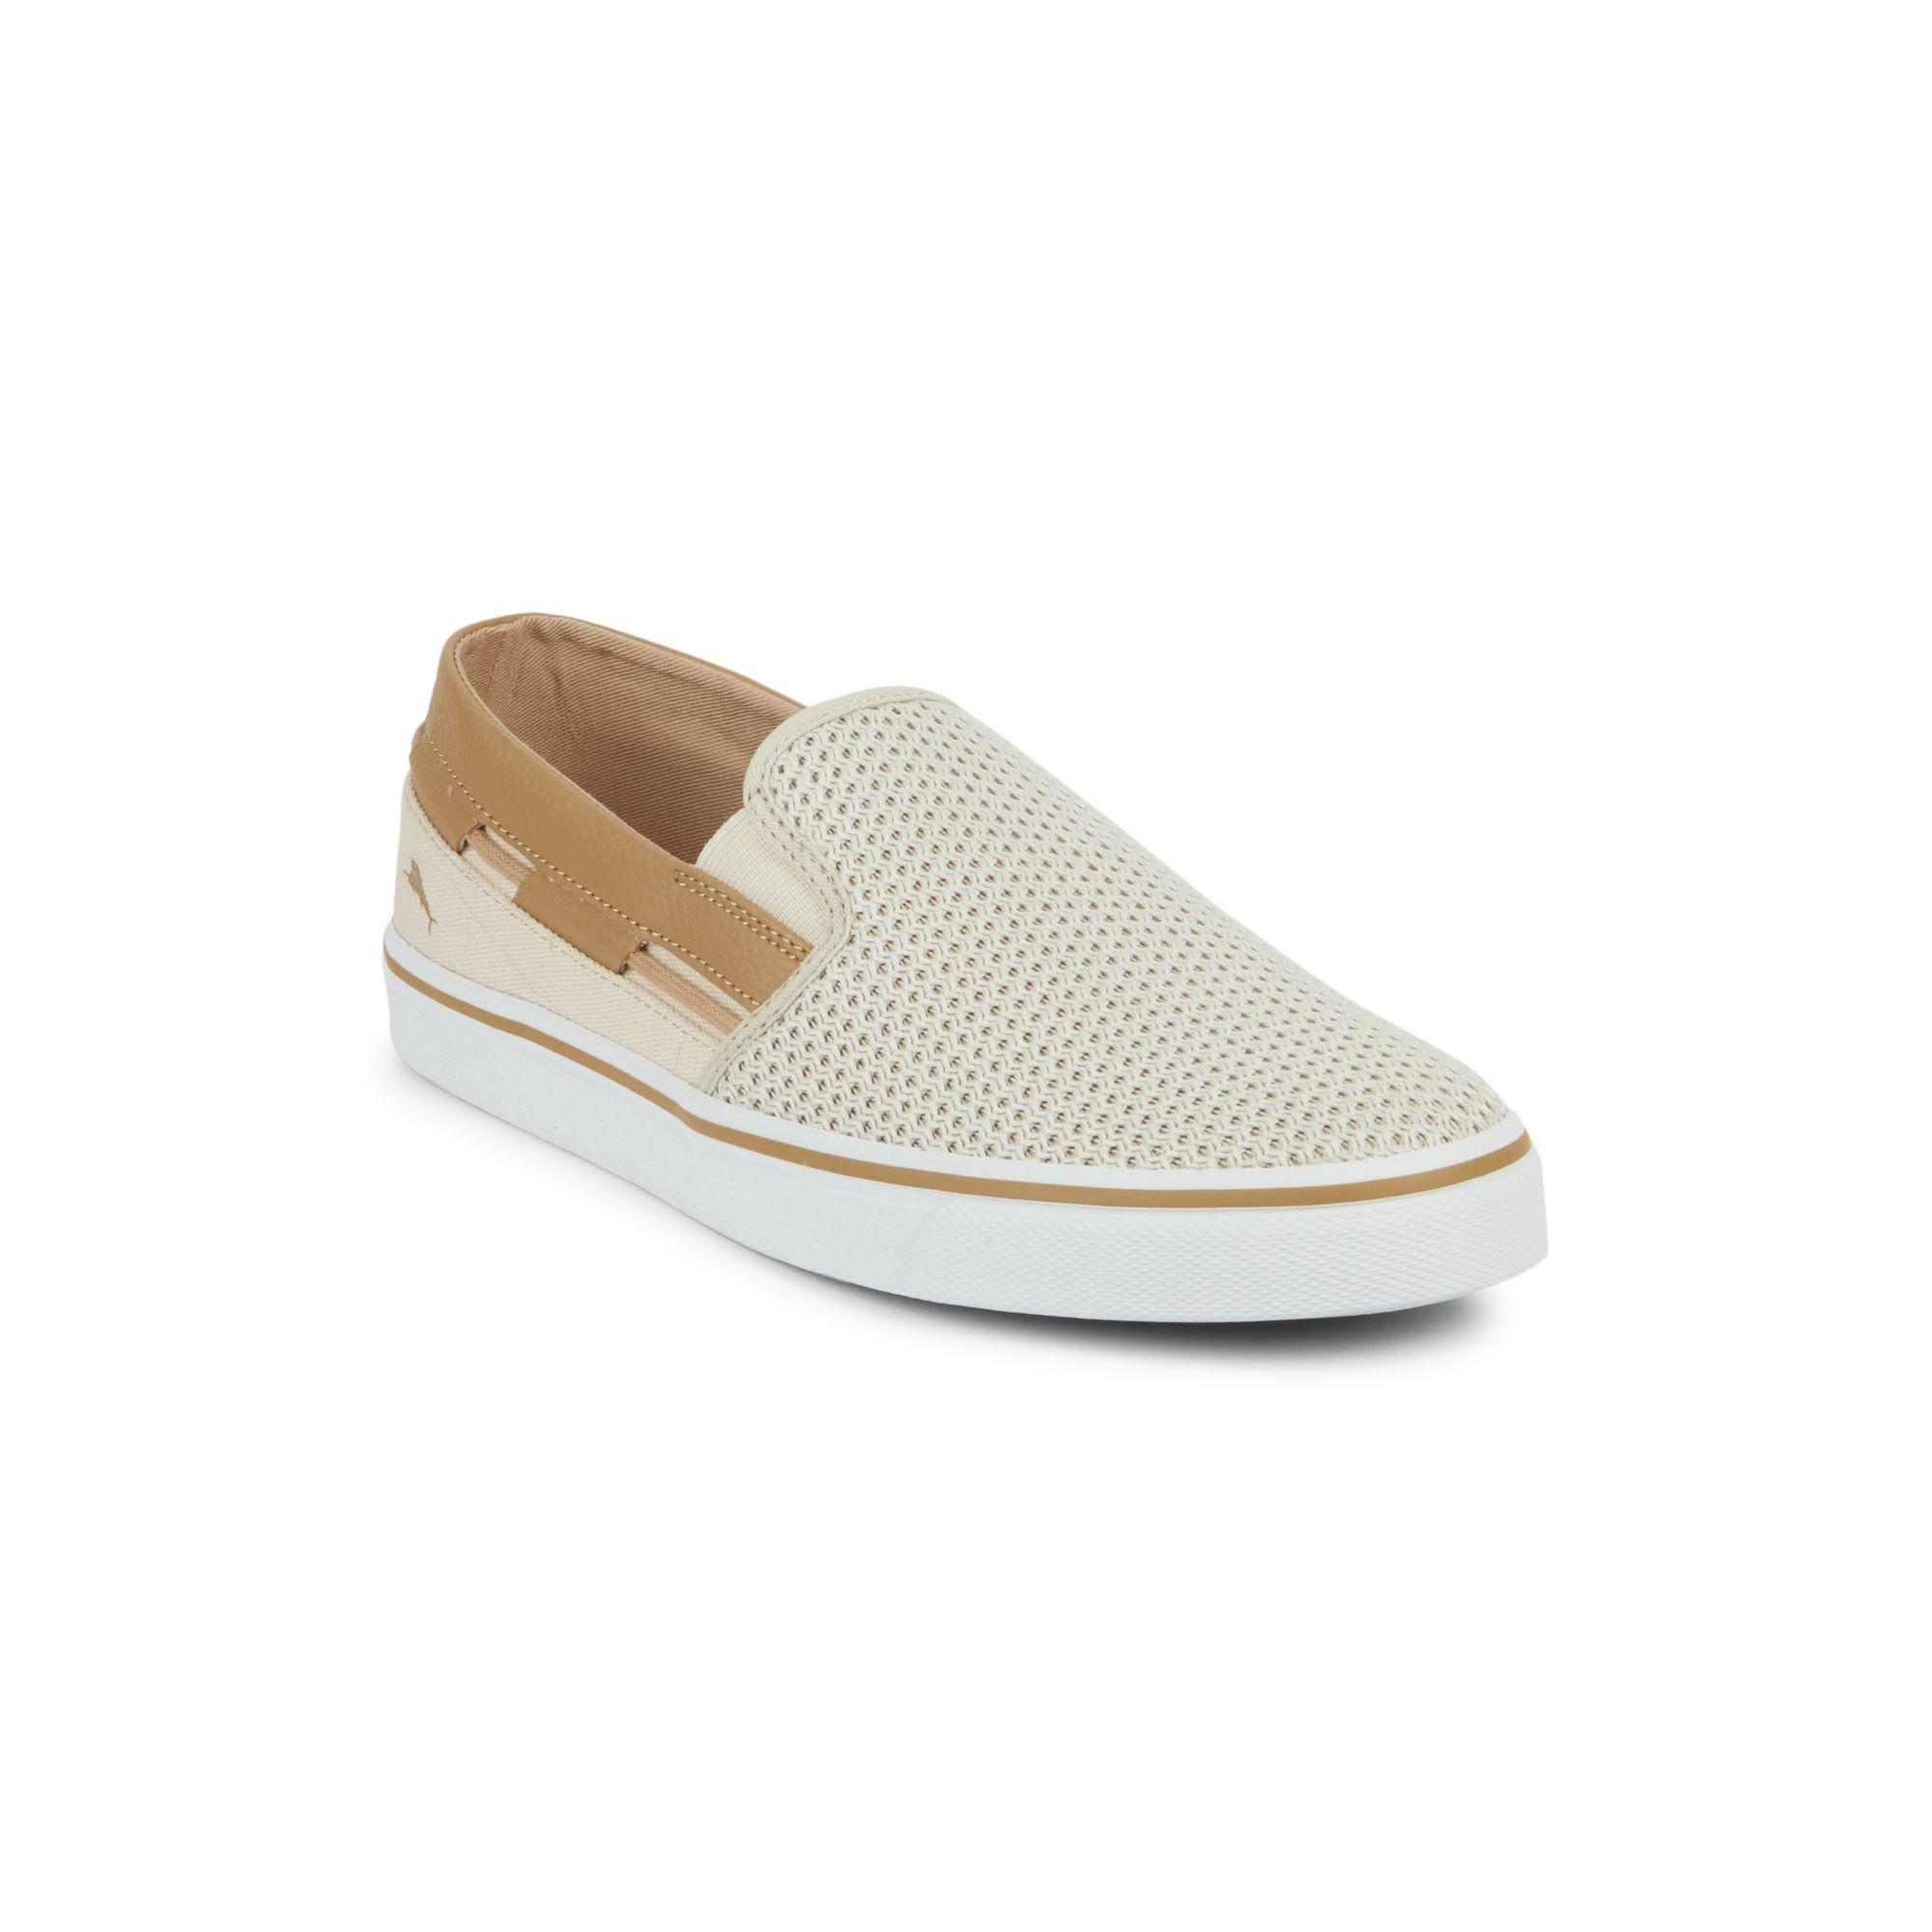 Tommy Bahama Jaali Canvas Loafers in White for Men - Lyst